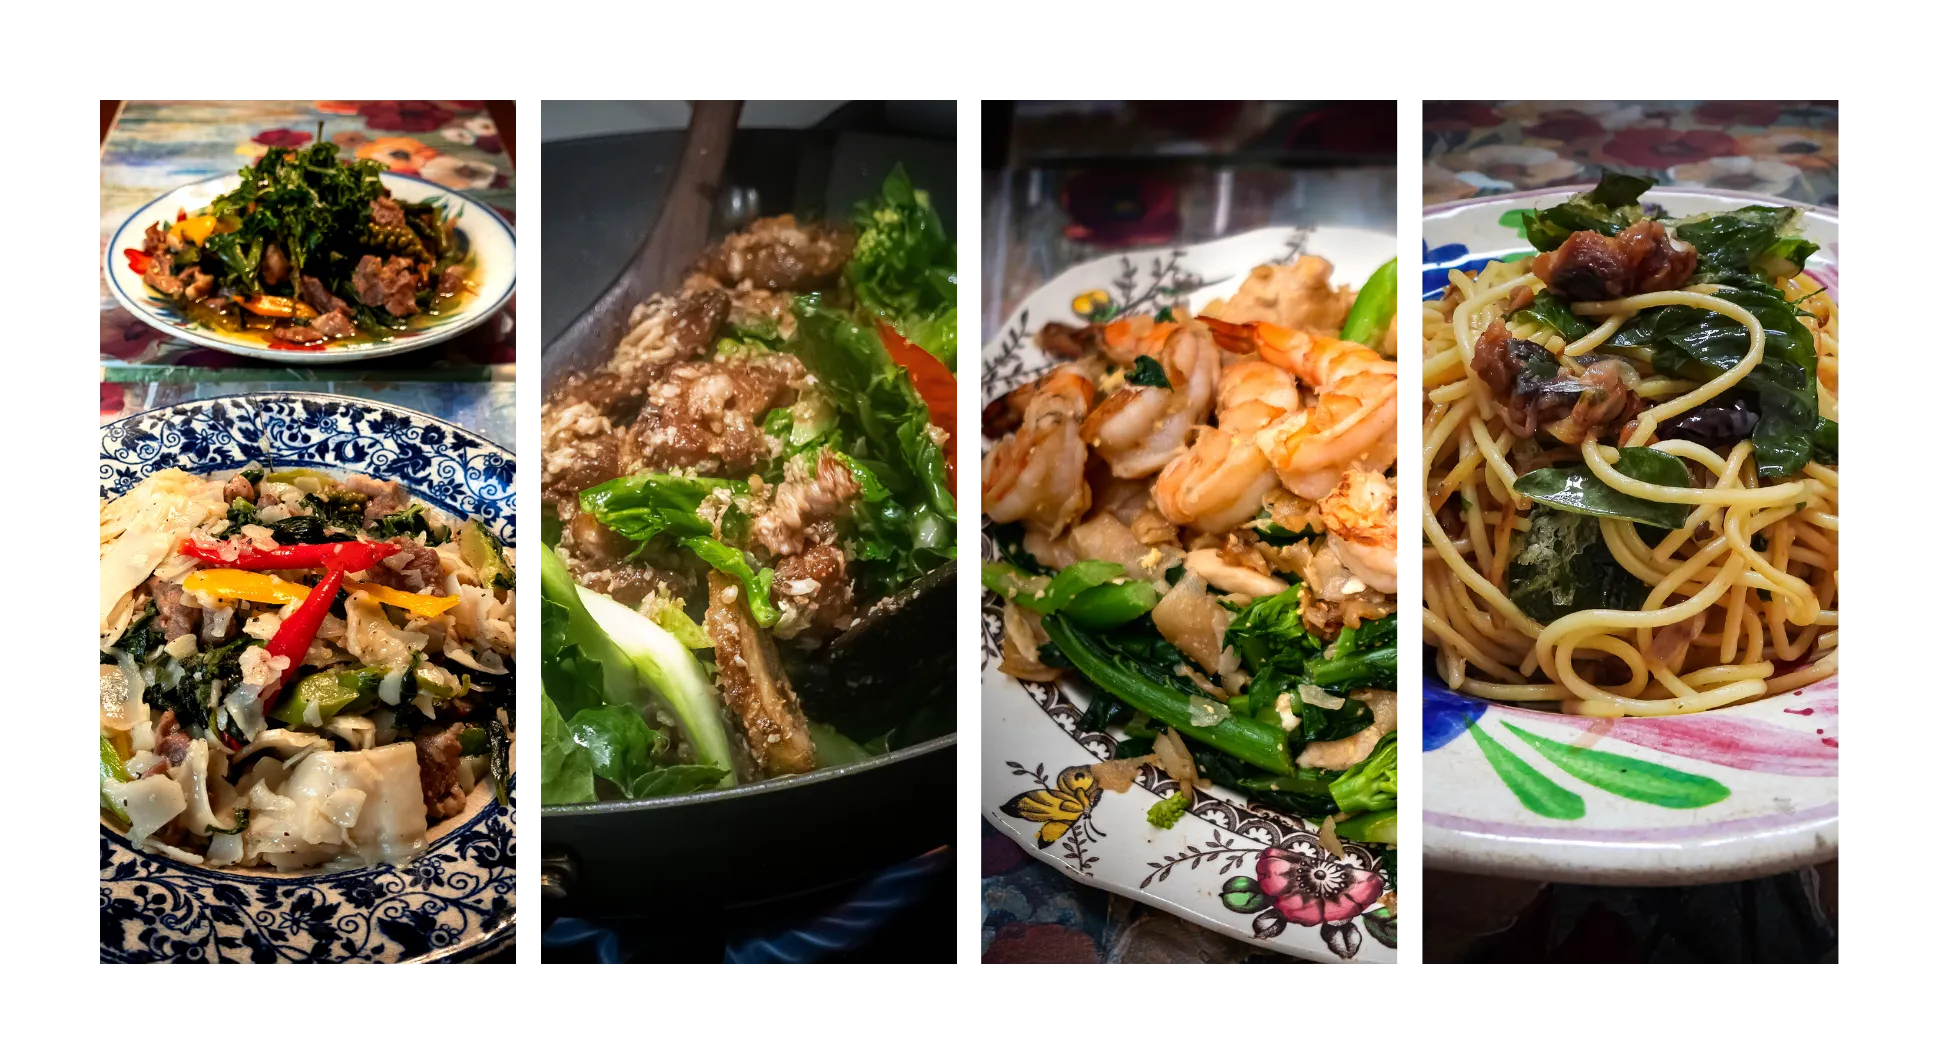 From Gaprow To Keemao And Recipes In Between will take you across the threshold that lies in between being an innocent non-Thai person who cooks Thai food from bottled Thai sauces, to becoming an educated person who understands and cooks LIKE A THAI.